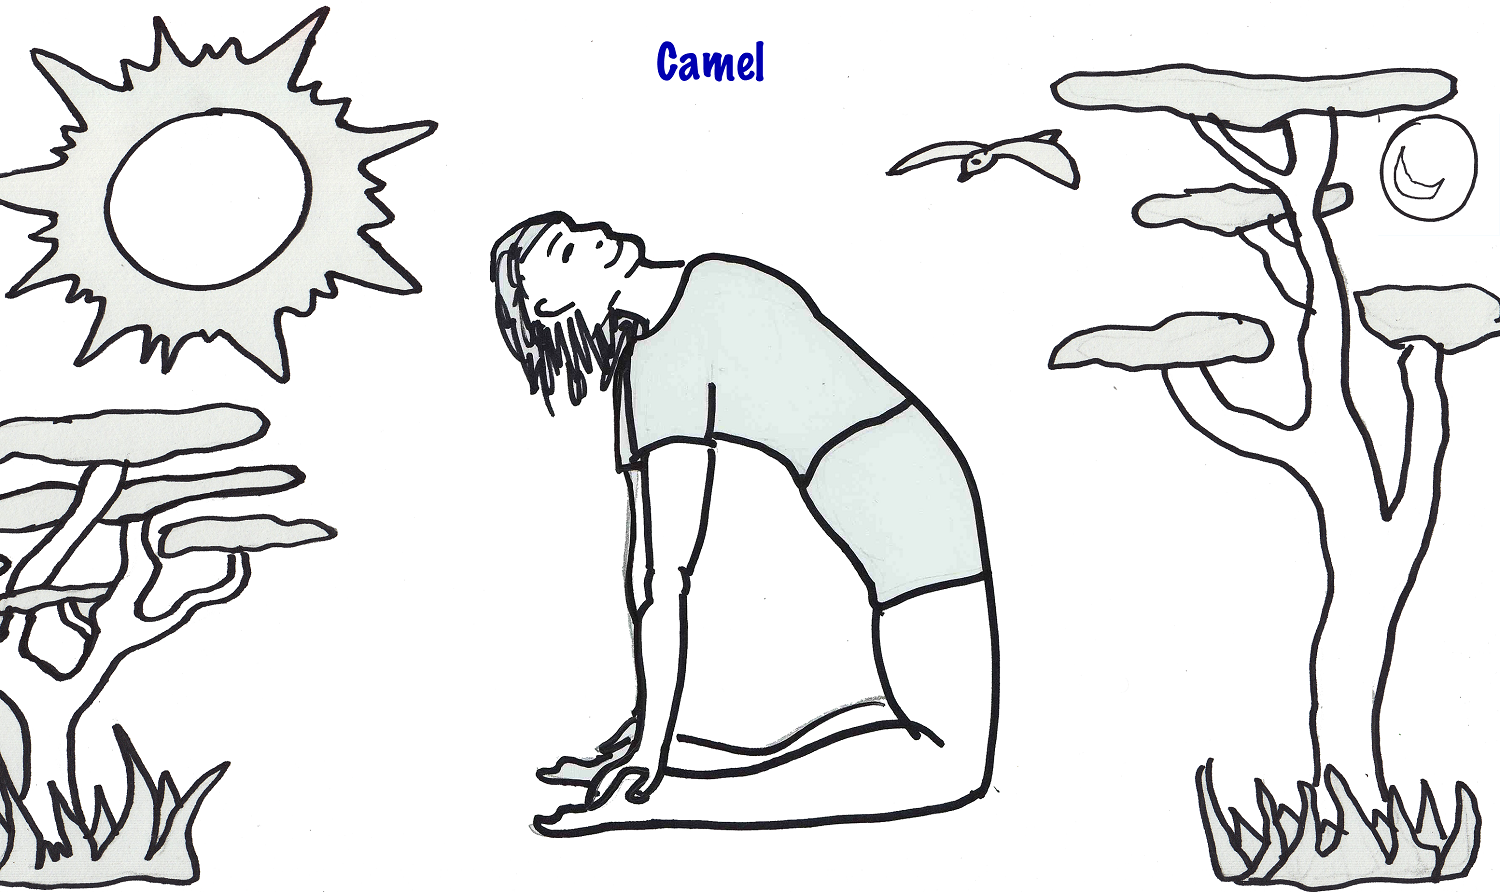 Yoga Coloring Pages for Kid Sport Introduction | Dear Joya